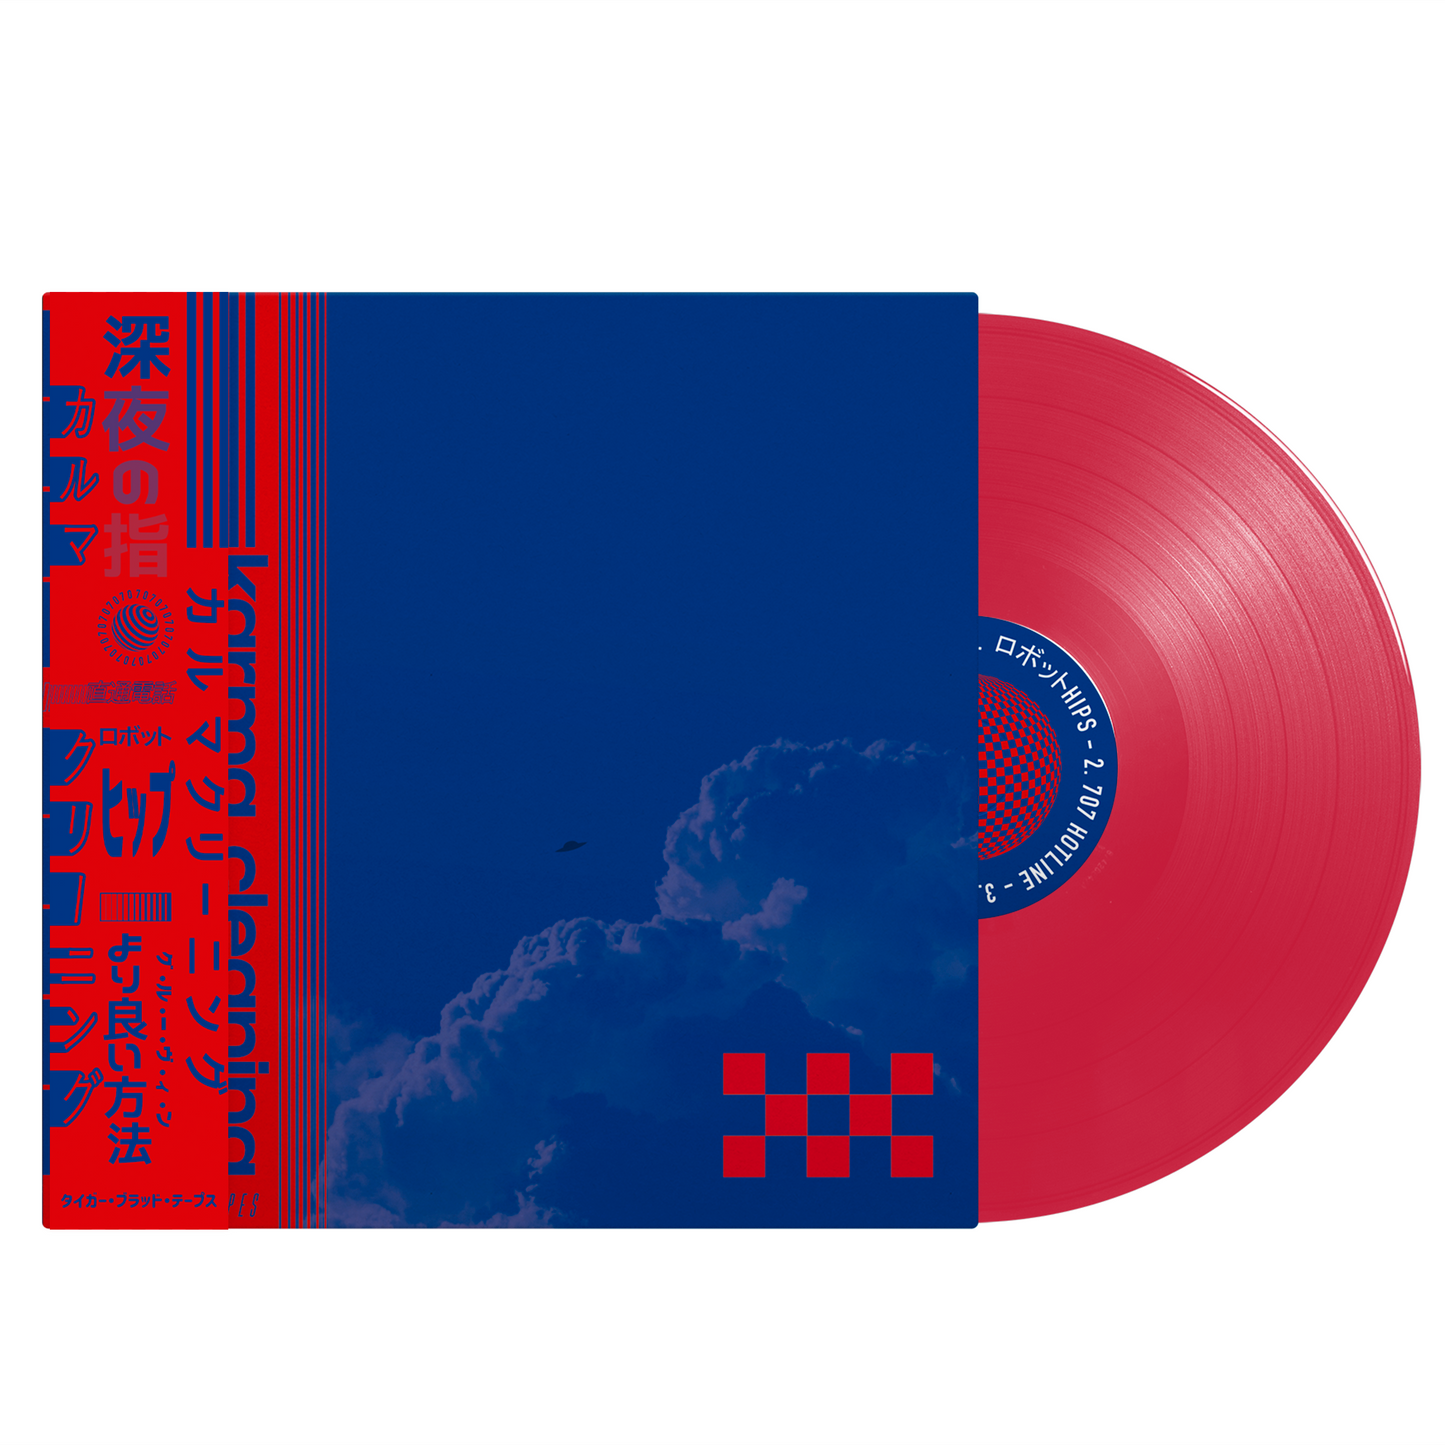 Cape Coral - "Karma Cleaning" Limited Edition Ruby Red Vinyl 12" LP